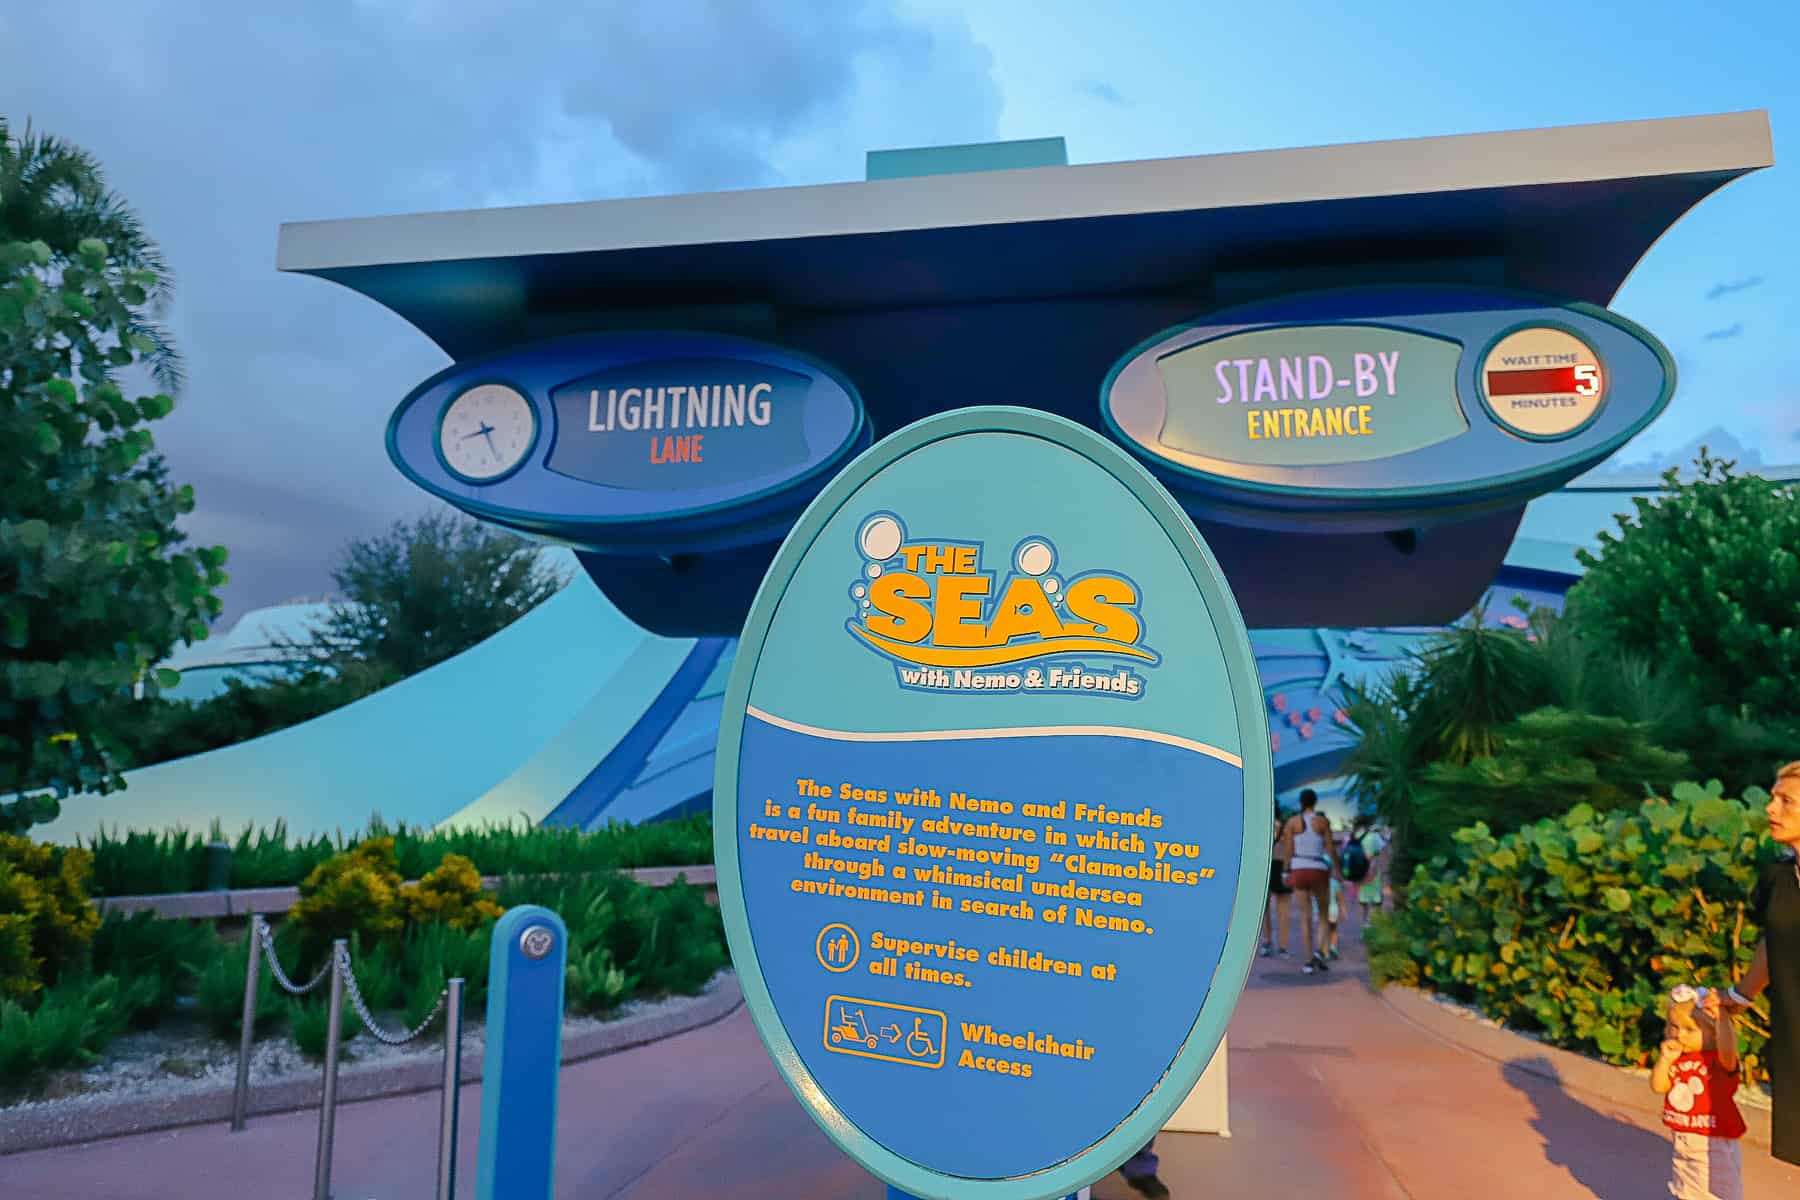 the entrance to the Lightning Lane and Stand-By for The Seas with Nemo and Friends 